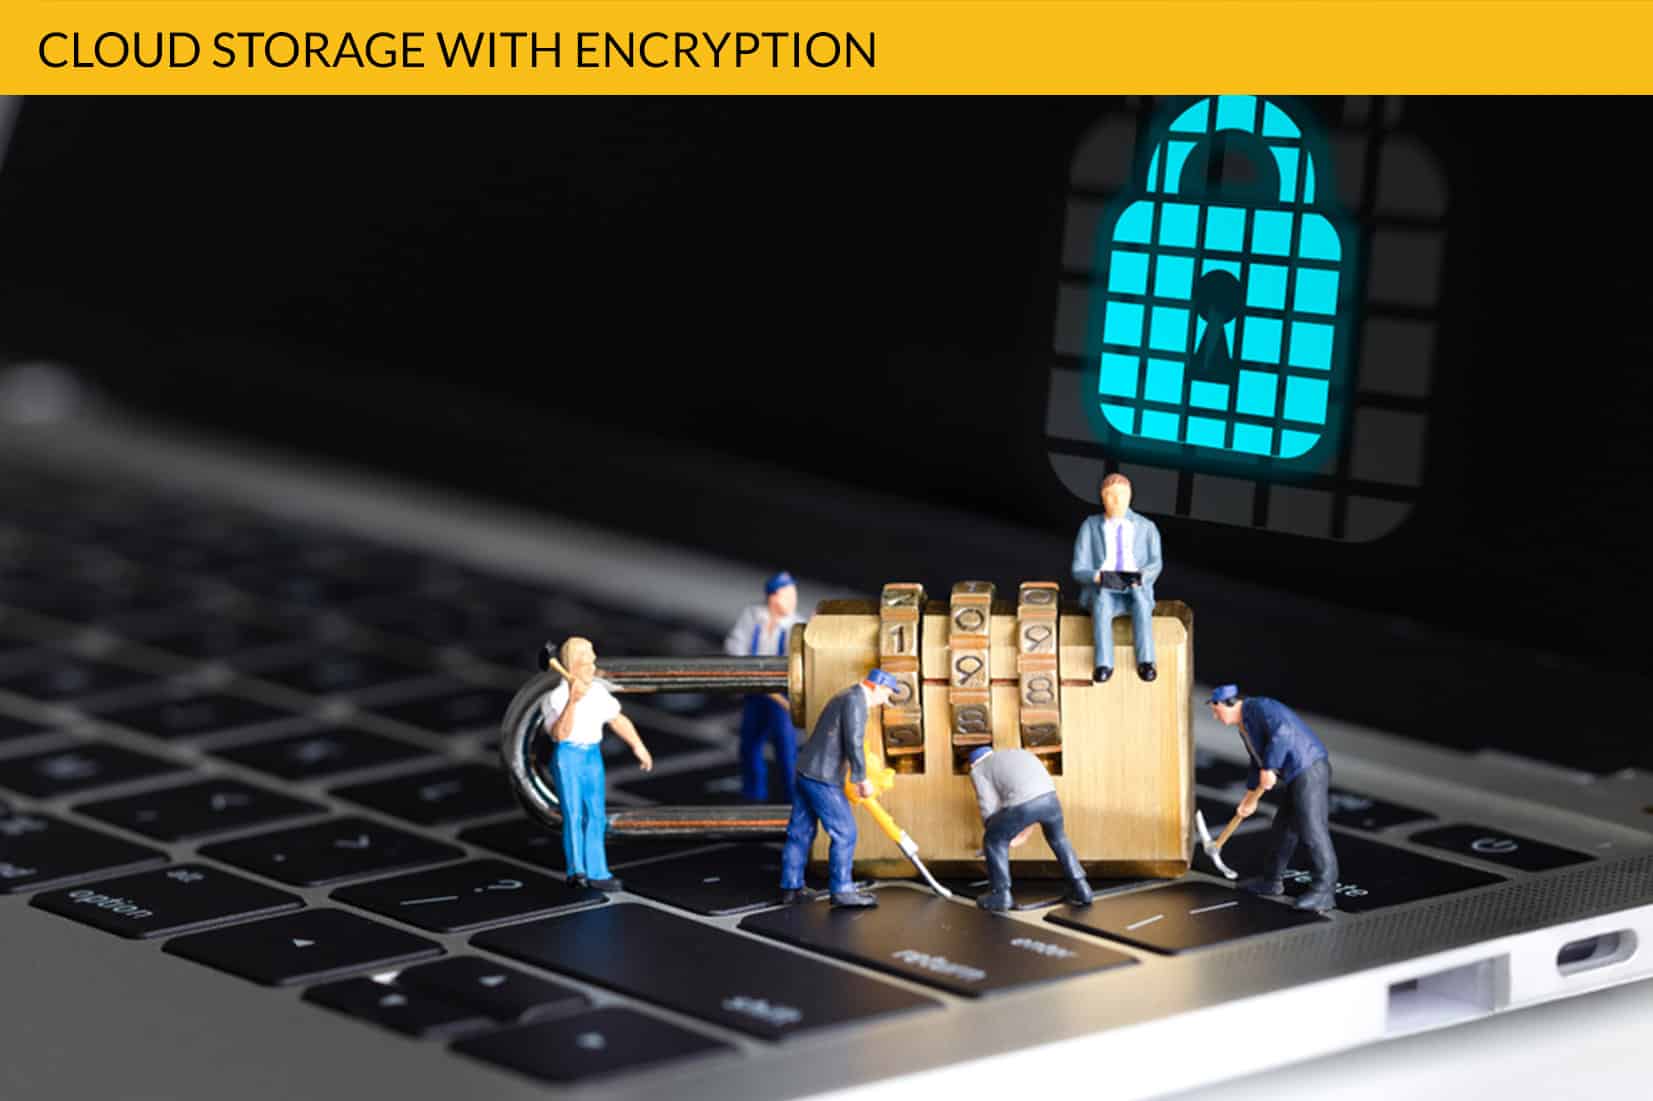 Cloud Storage with Encryption